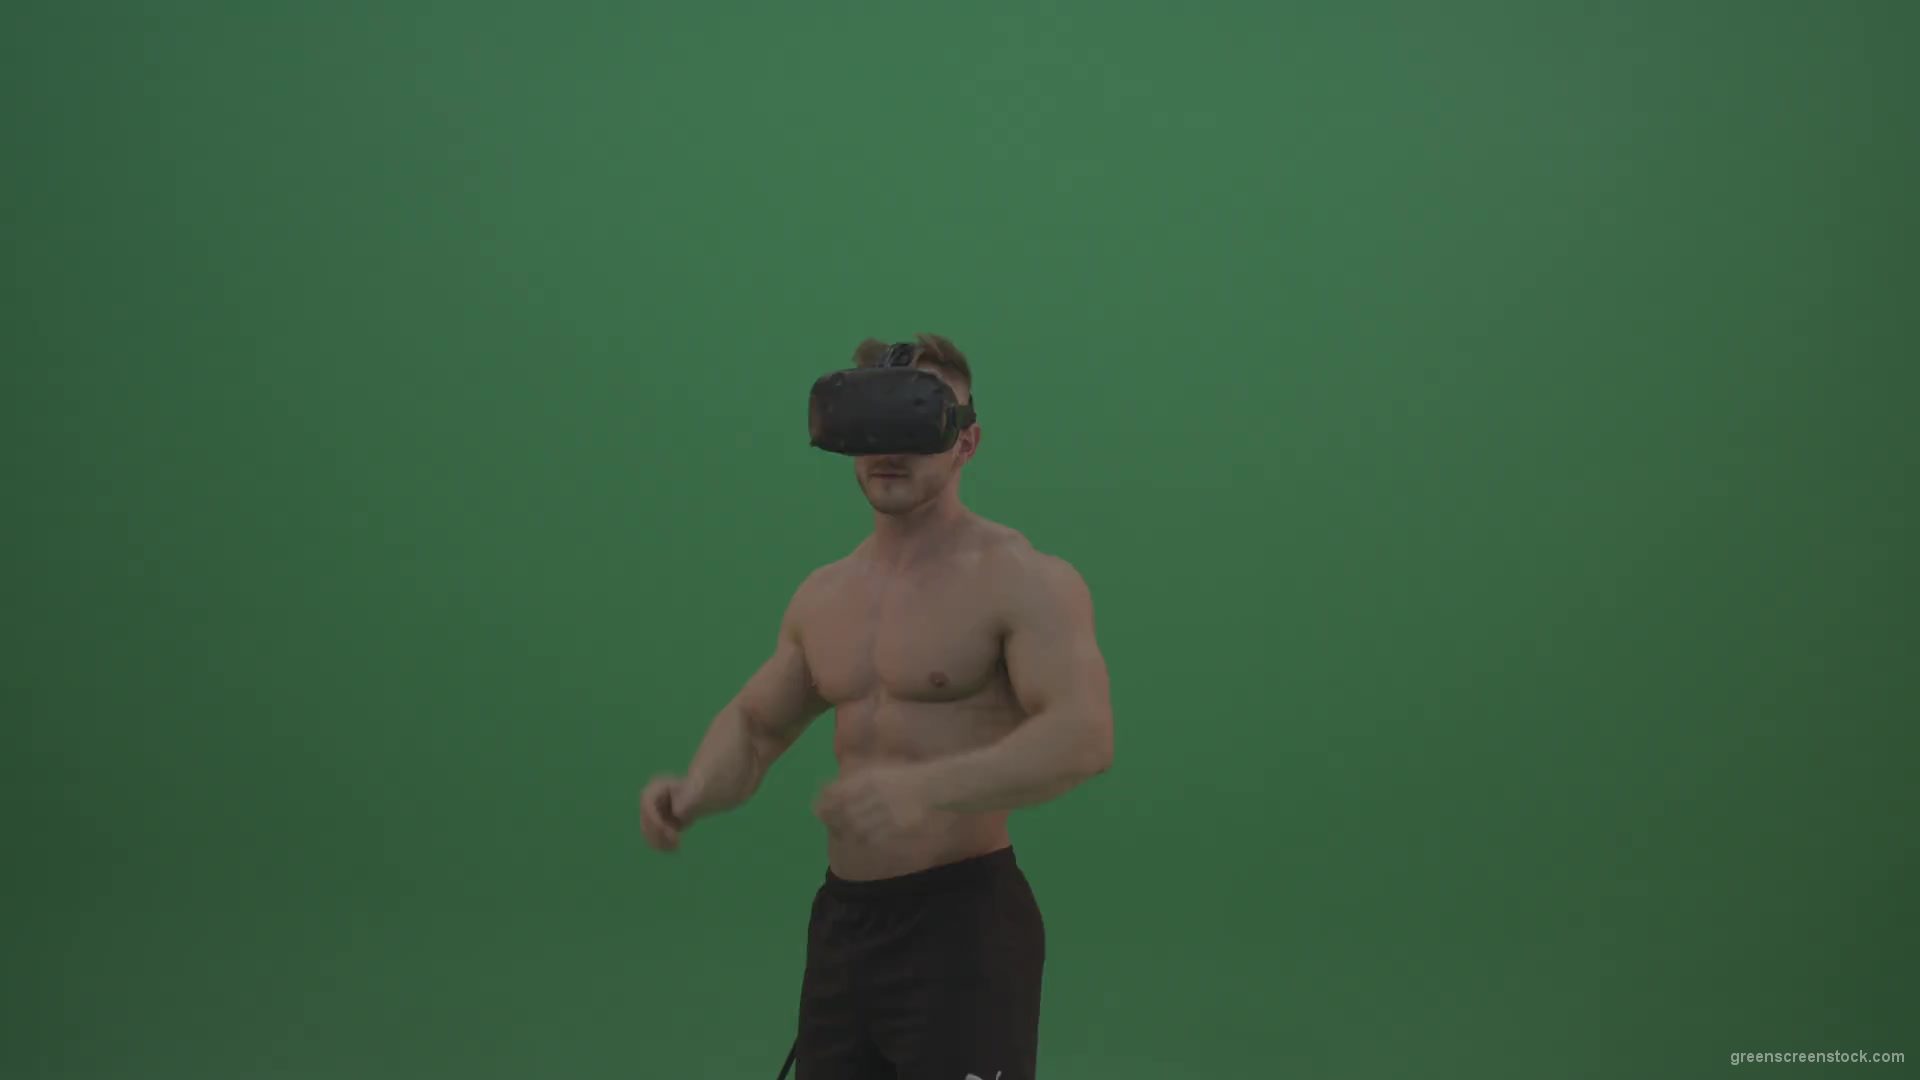 Young_Athletic_Bodybuilder_Working_On_Touch_Pad_Using_Virtual_Reality_Kit_On_Green_Screen_Wall_Background-1920_001 Green Screen Stock